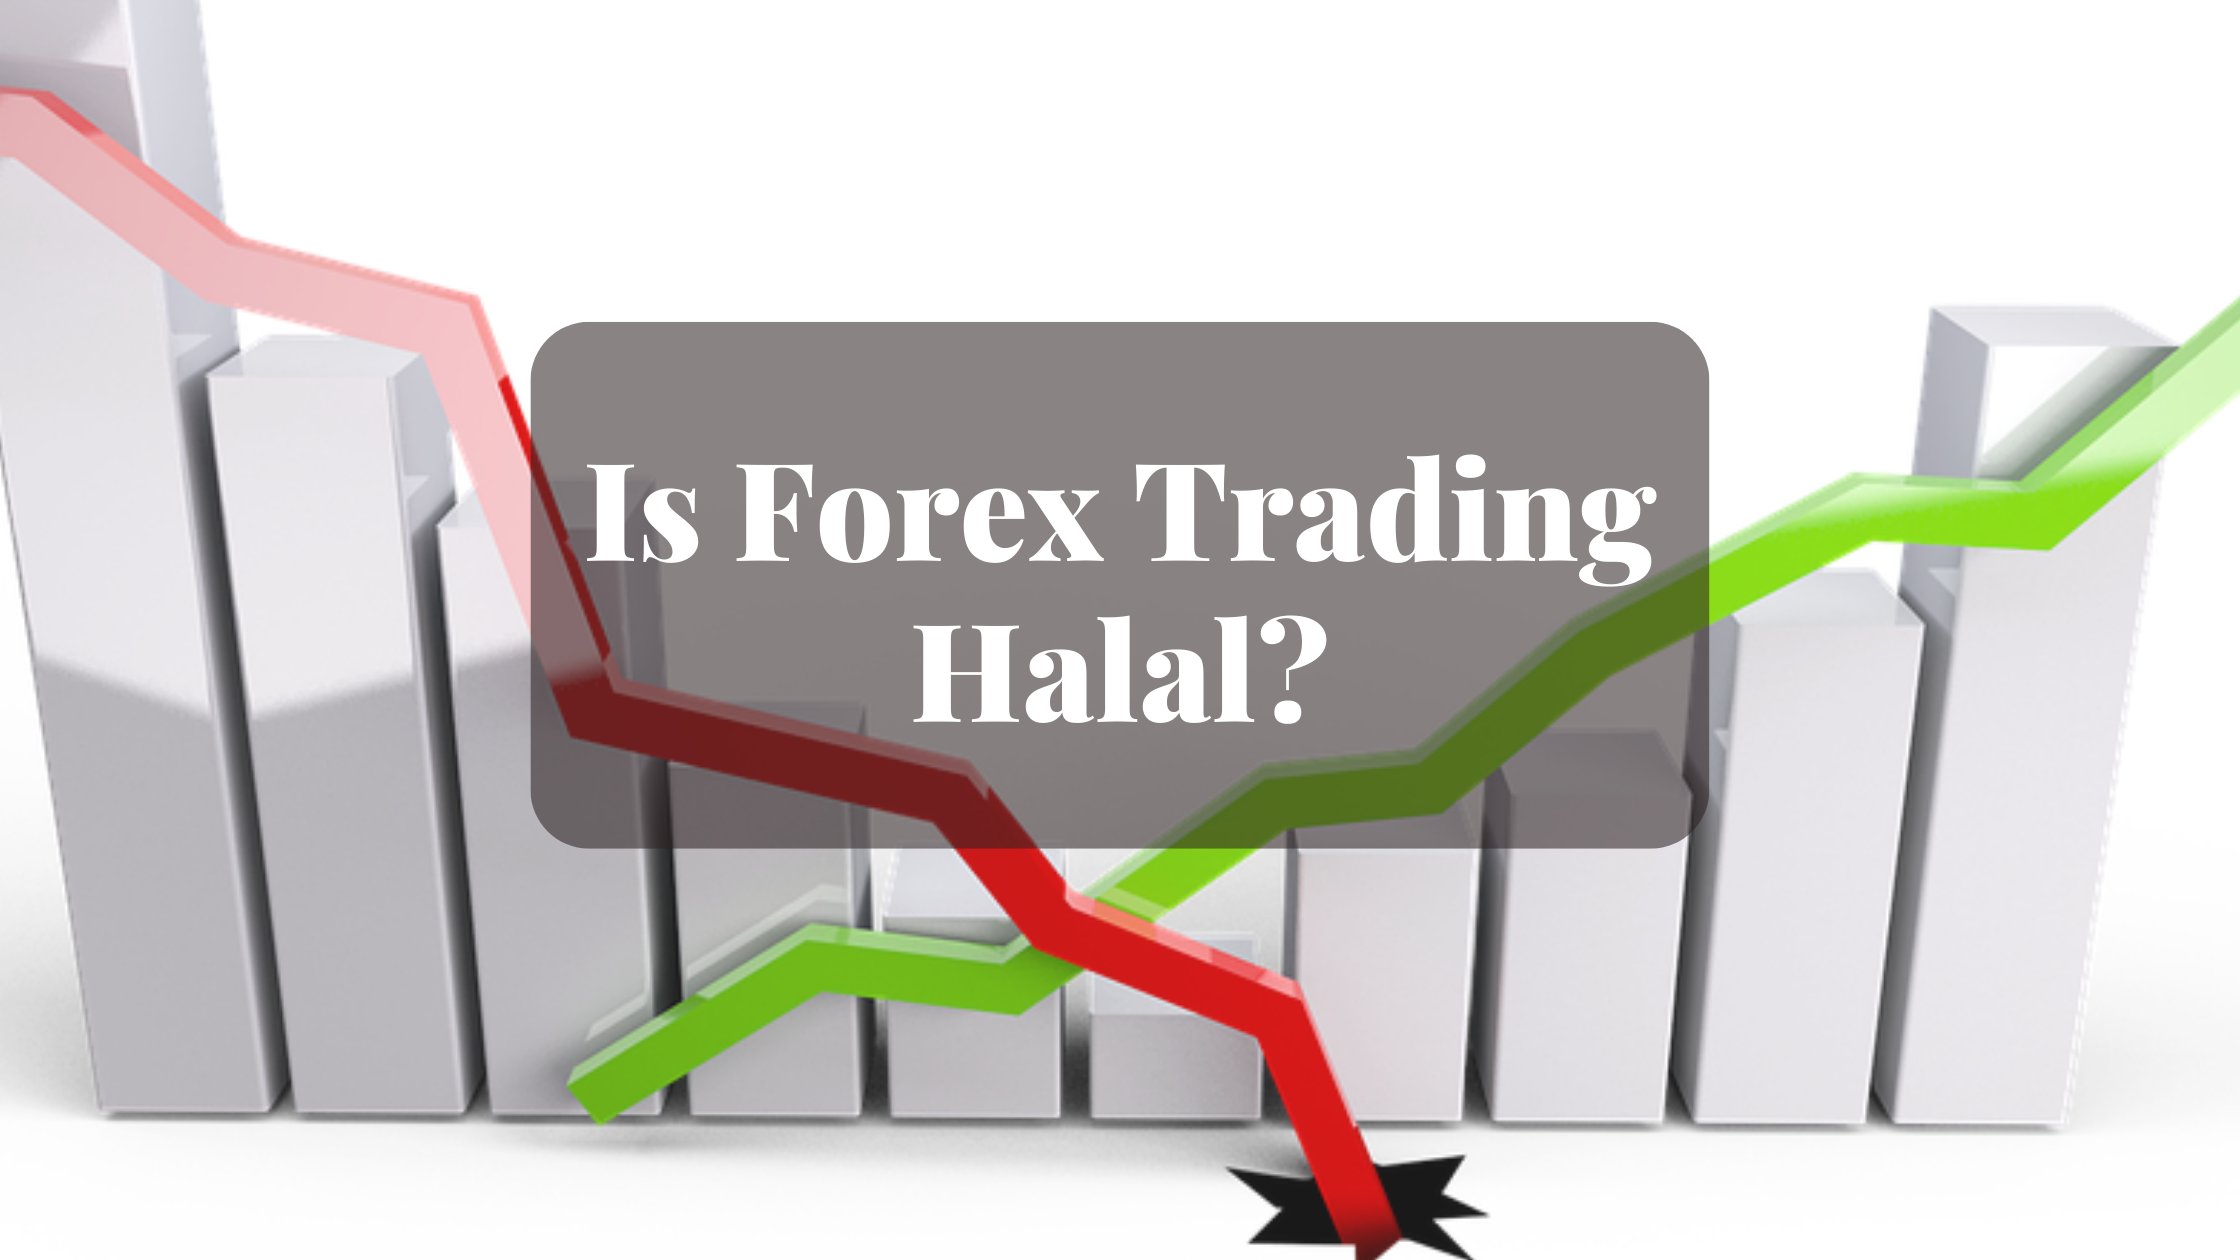 Is Forex Trading Halal